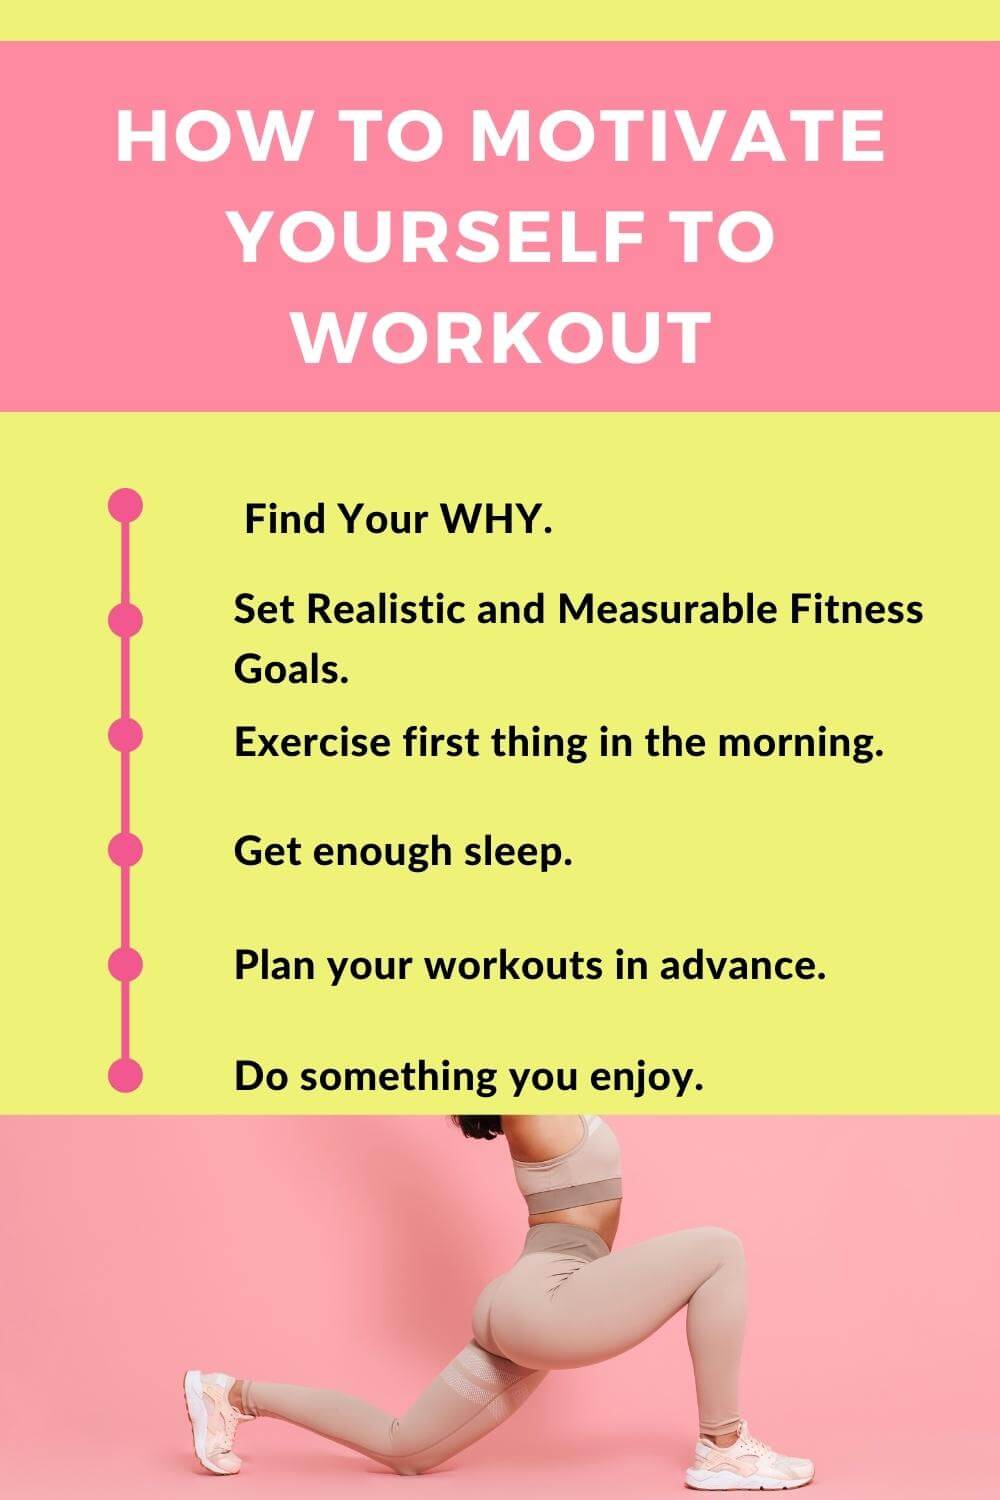 How To Motivate Yourself To Workout 7 Powerful Tips